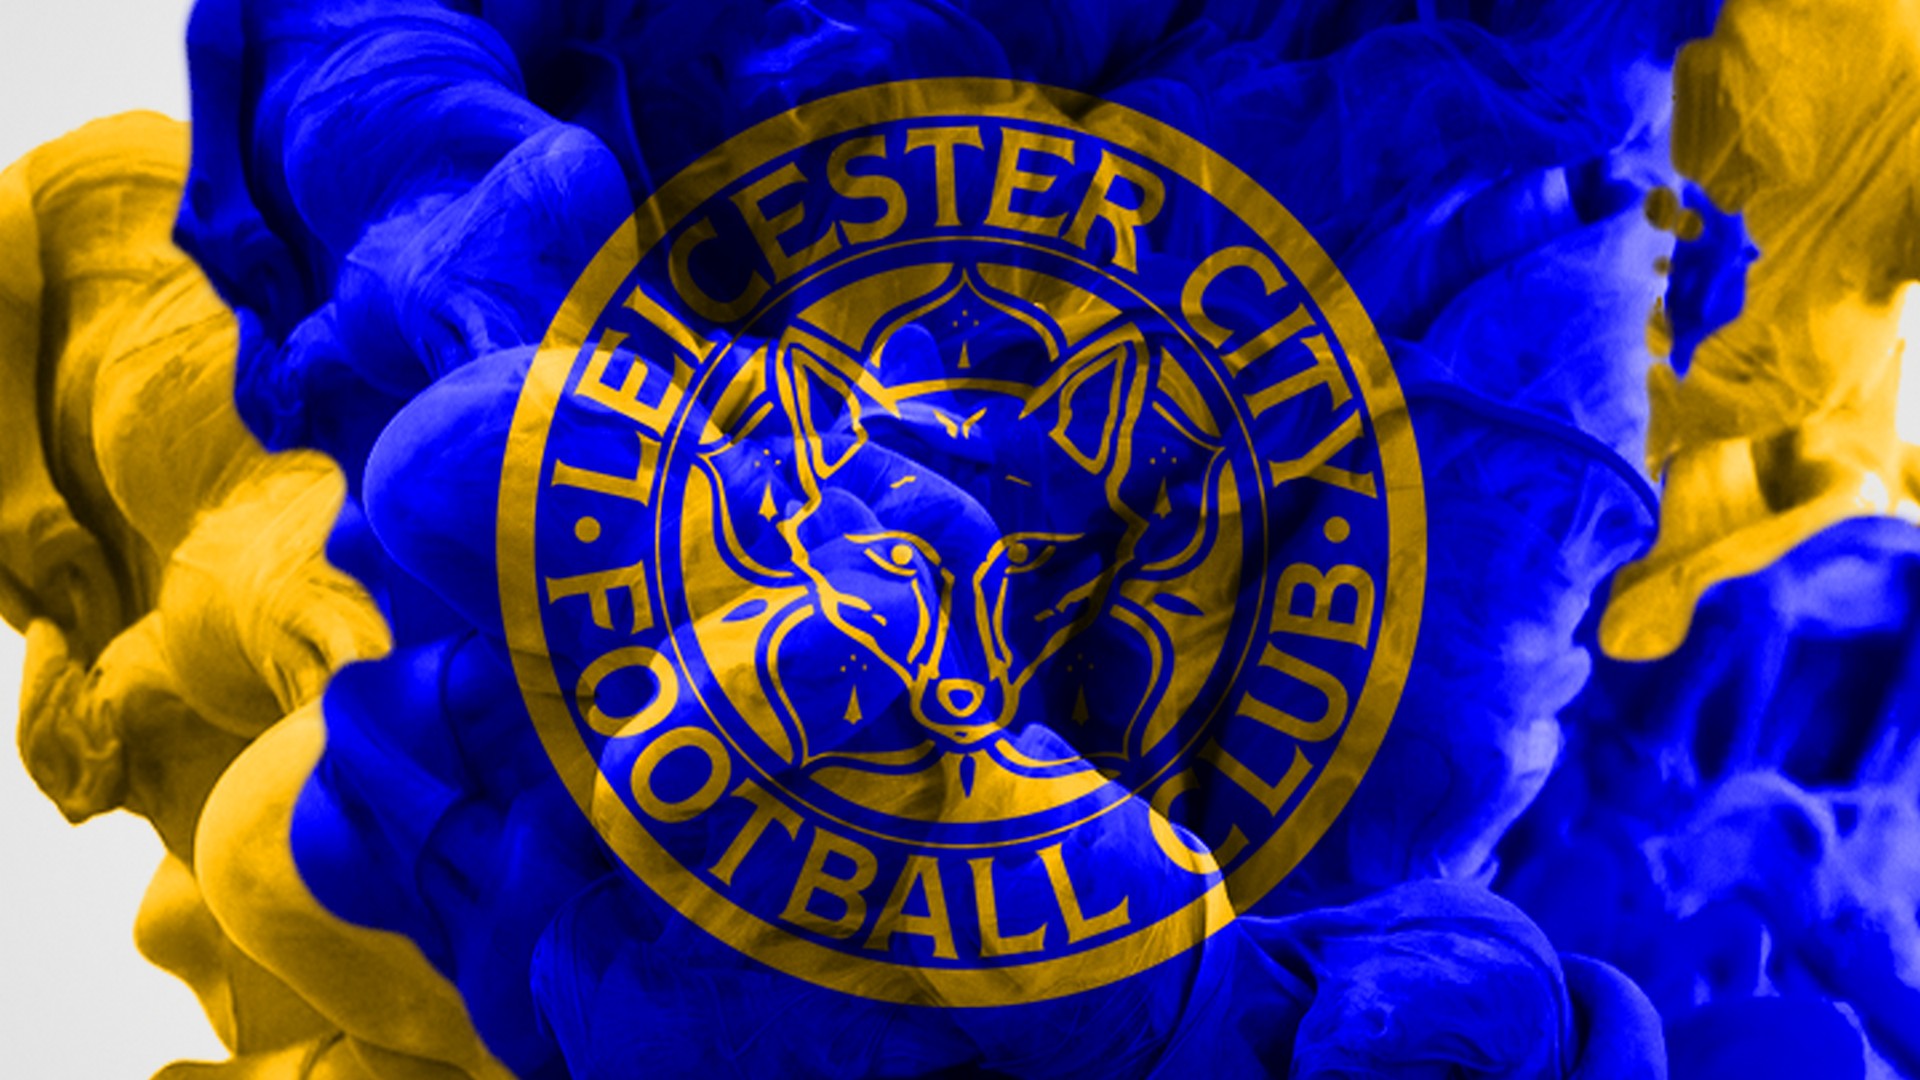 HD Desktop Wallpaper Leicester City With high-resolution 1920X1080 pixel. You can use this wallpaper for your Desktop Computers, Mac Screensavers, Windows Backgrounds, iPhone Wallpapers, Tablet or Android Lock screen and another Mobile device